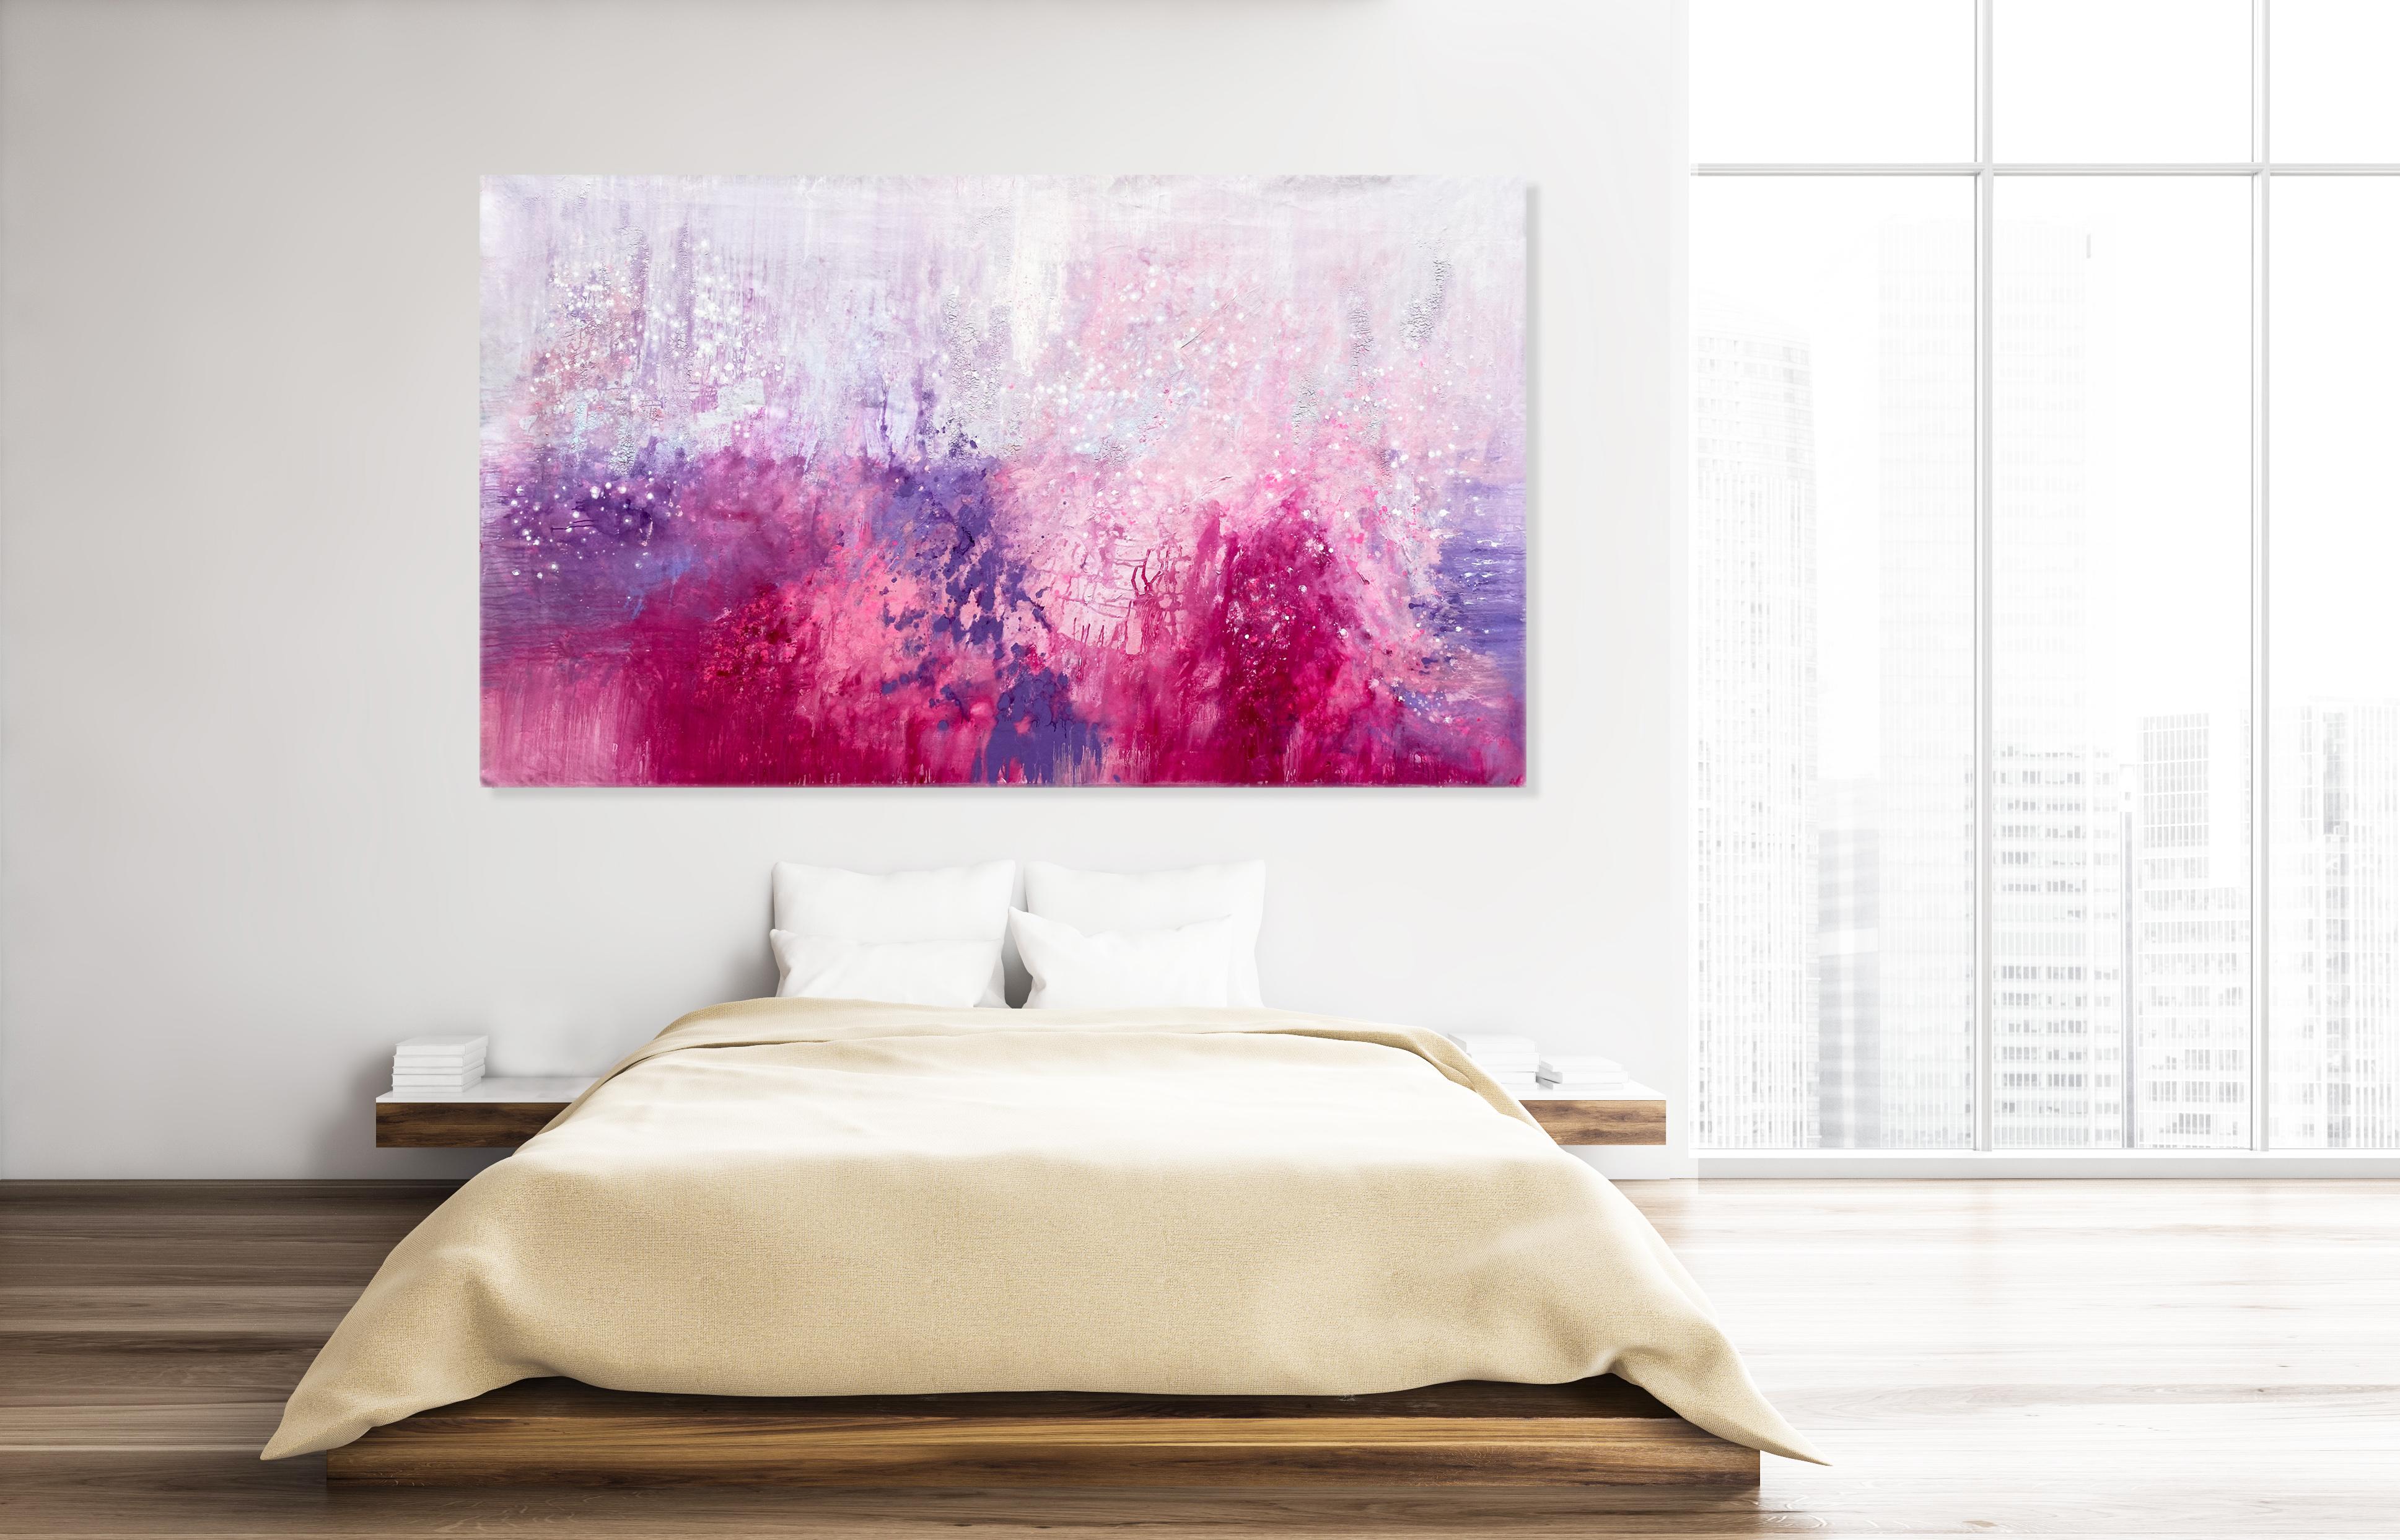 Keep Dreaming large statement art abstract expression painting pink purple white - Painting by Kathleen Rhee